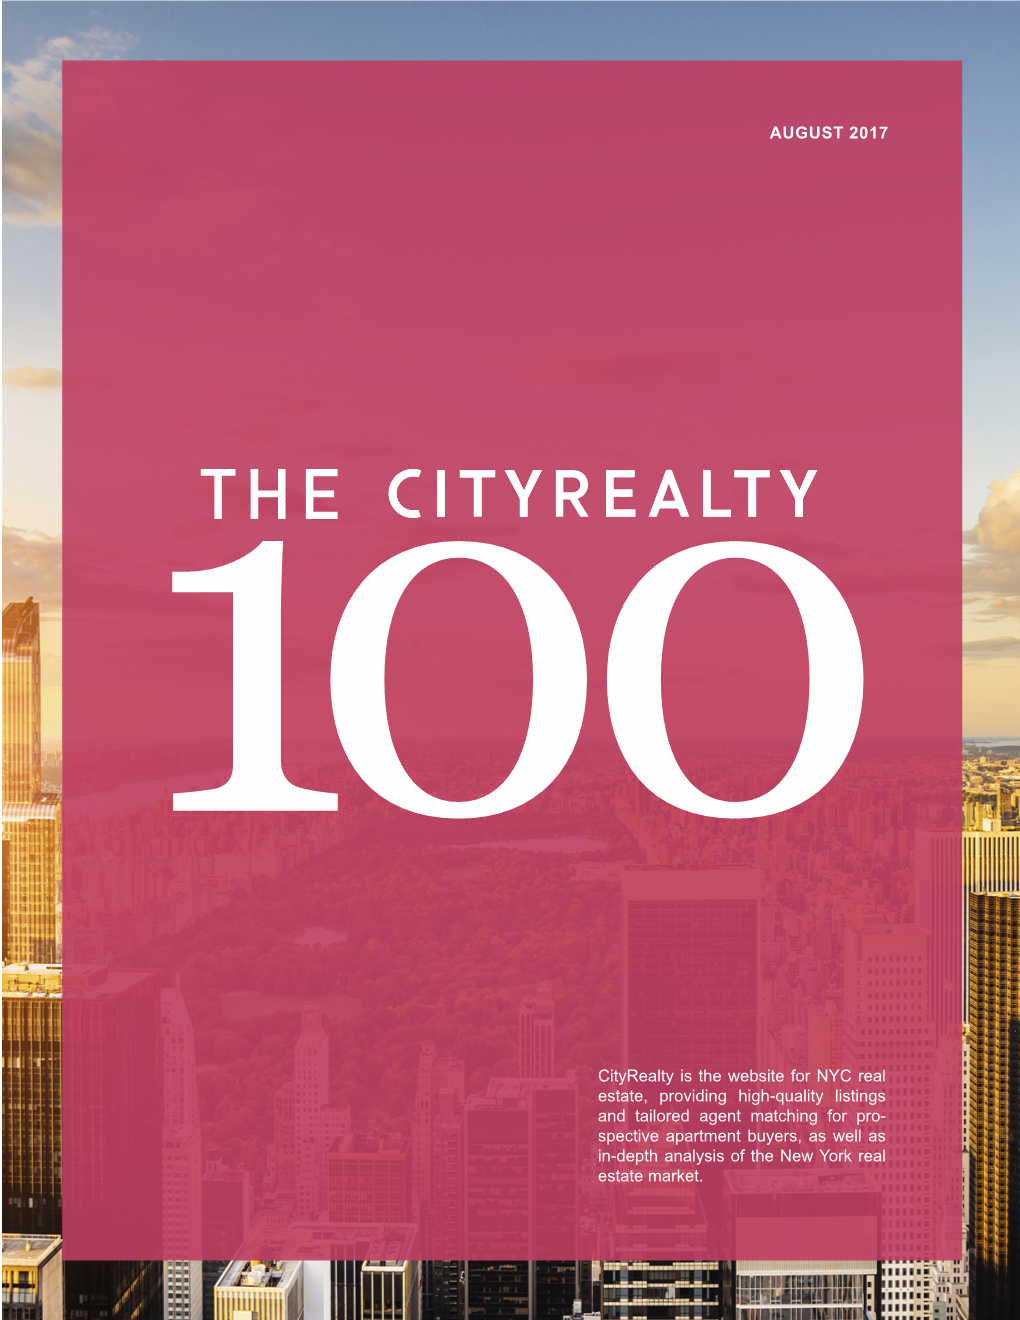 AUGUST 2017 Cityrealty Is the Website for NYC Real Estate, Providing High-Quality Listings and Tailored Agent Matching for Pro